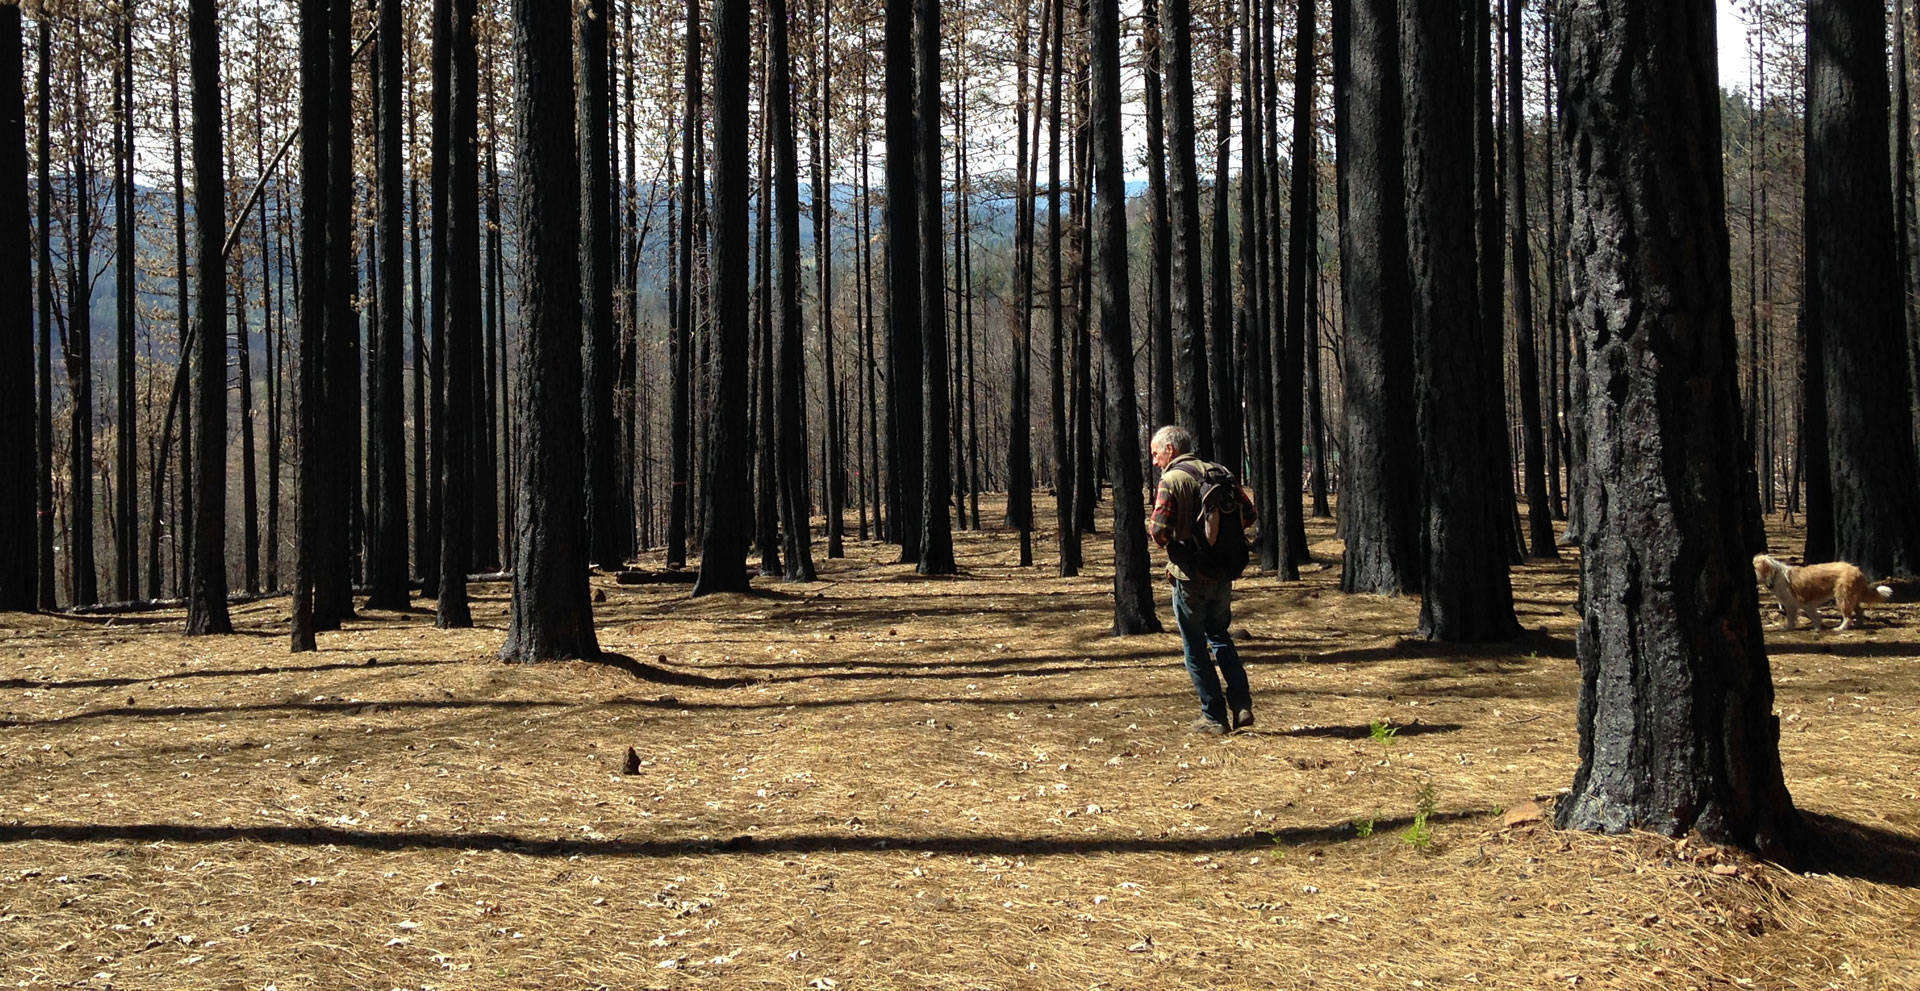 Kevin Sadlier hunts for morels in the Lake County forest burned by the Valley Fire. Lisa Morehouse/KQED